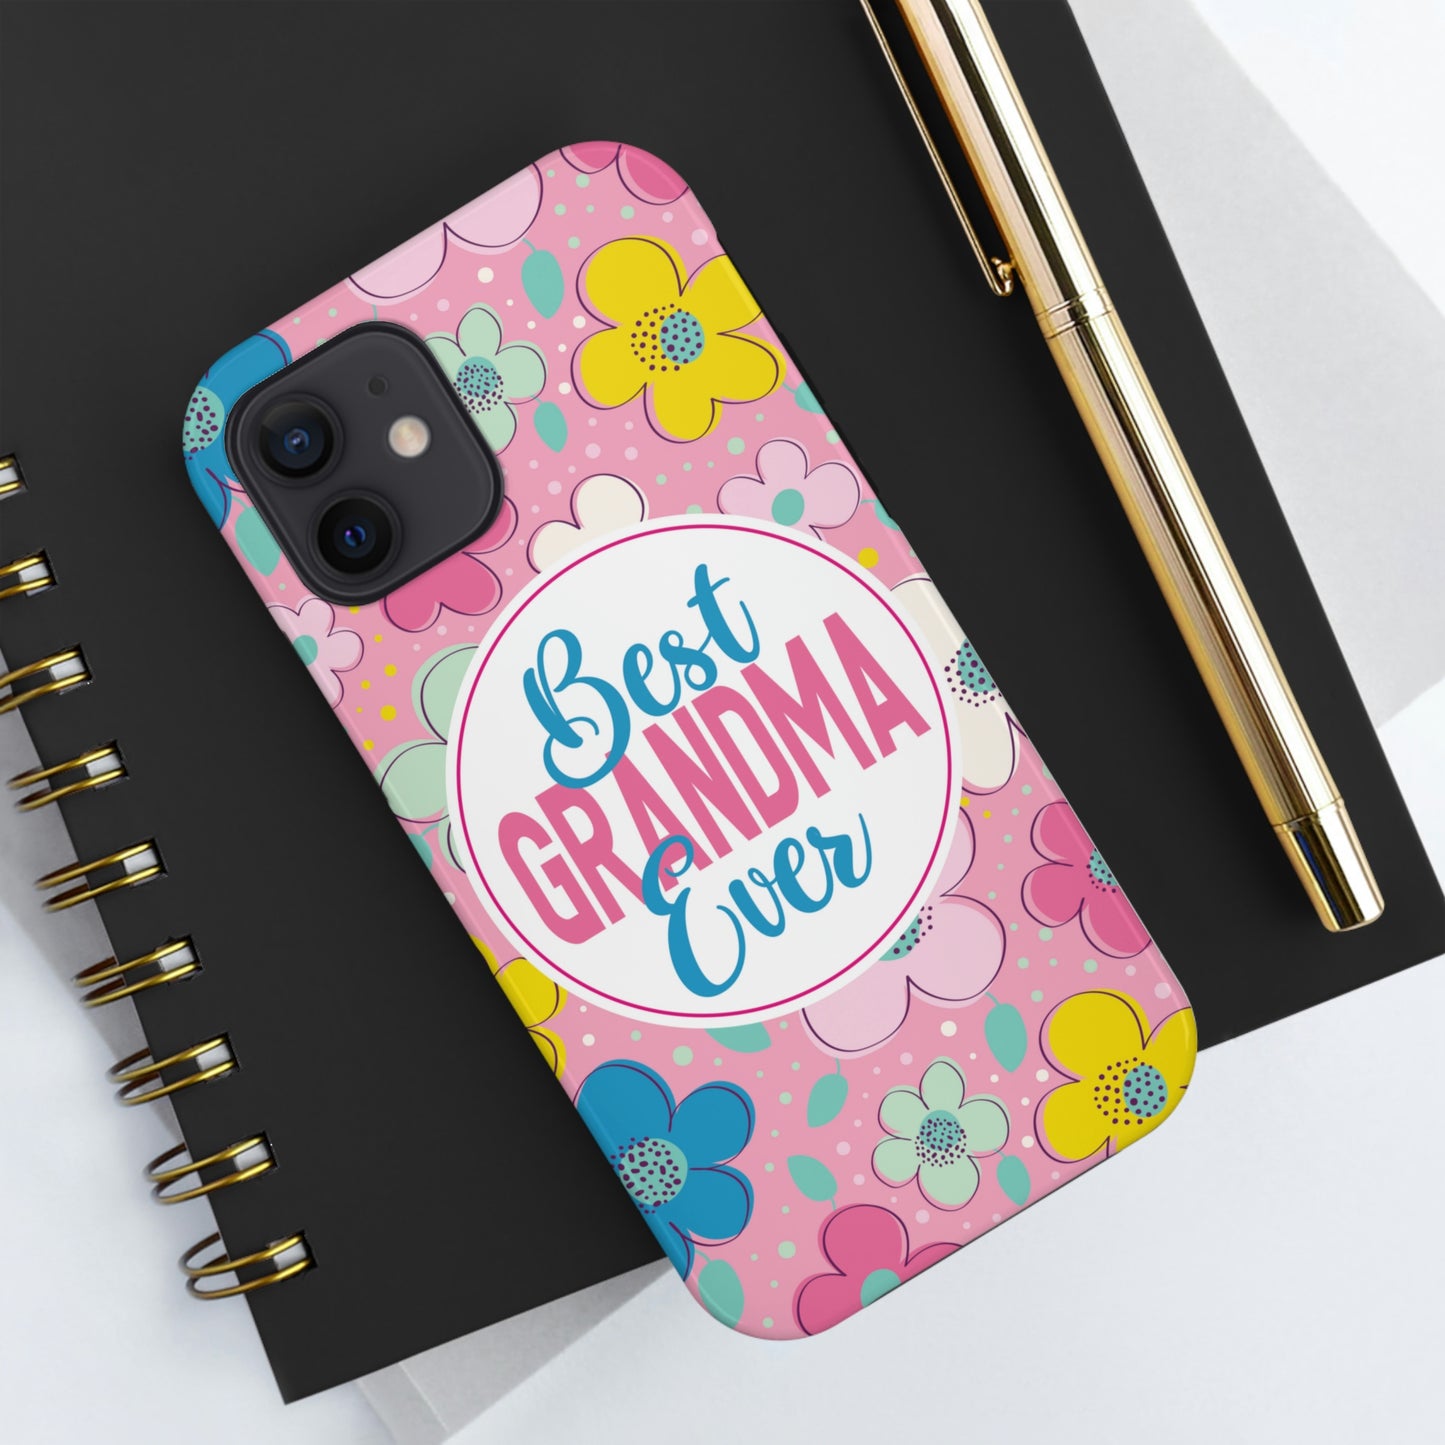 Best Grandma Ever Tough Phone Cases by Case-Mate, Mothers Day Gift